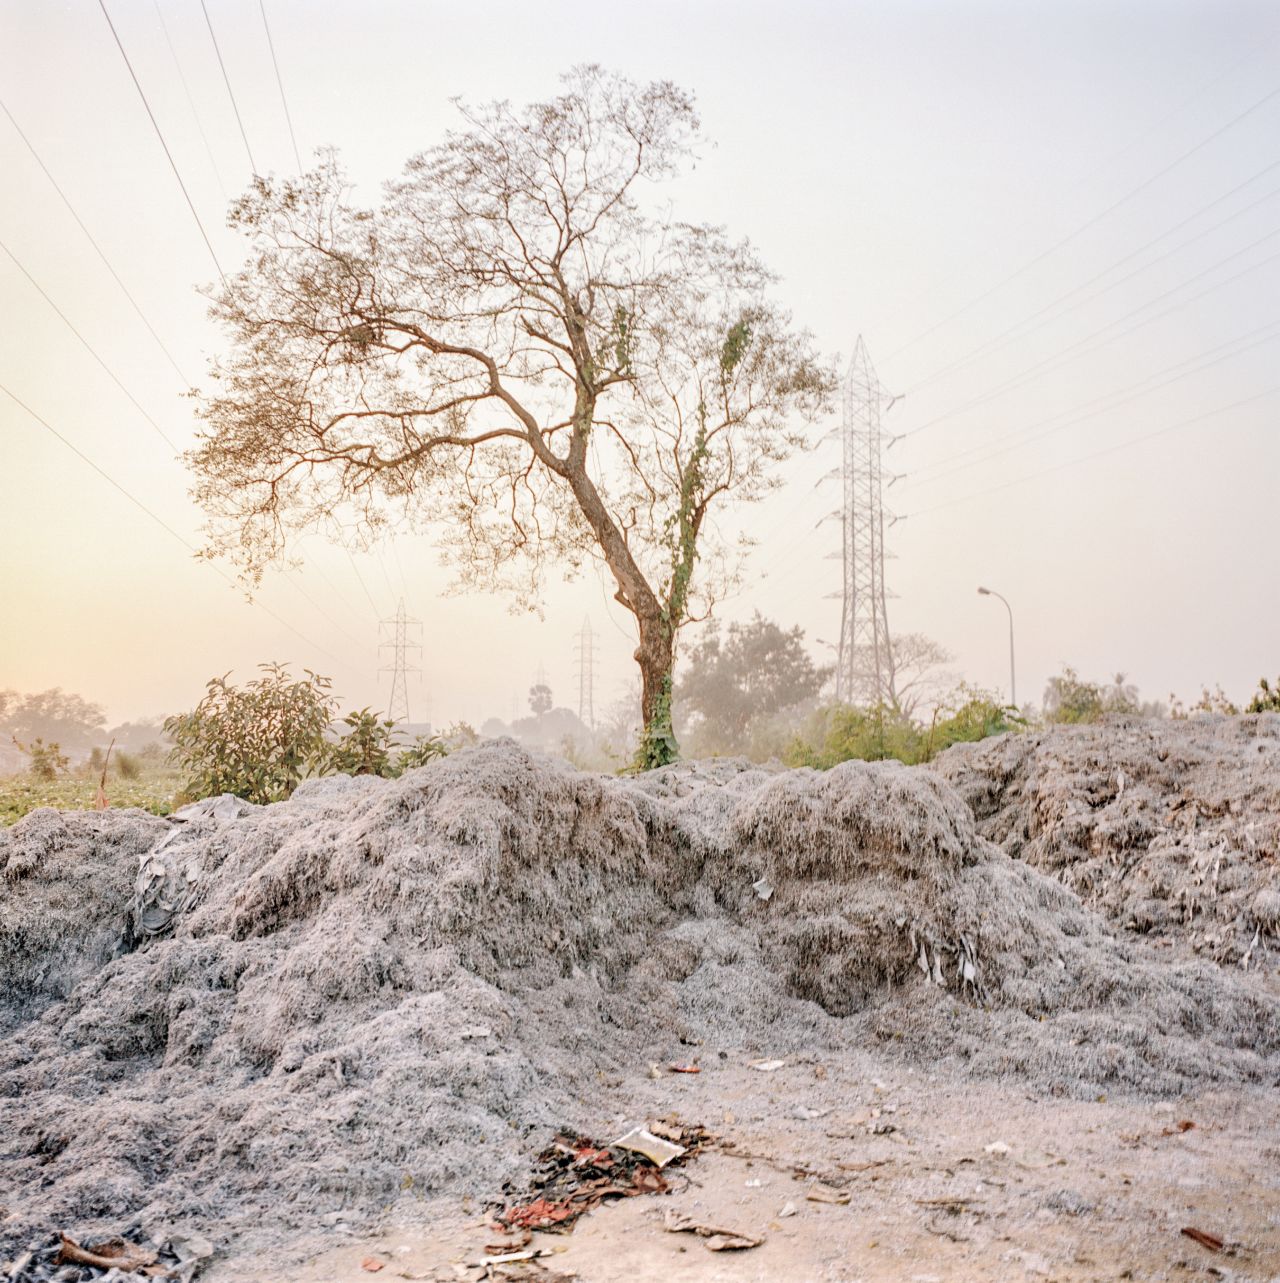 Pollution from leather tannaries outside Kolkata.